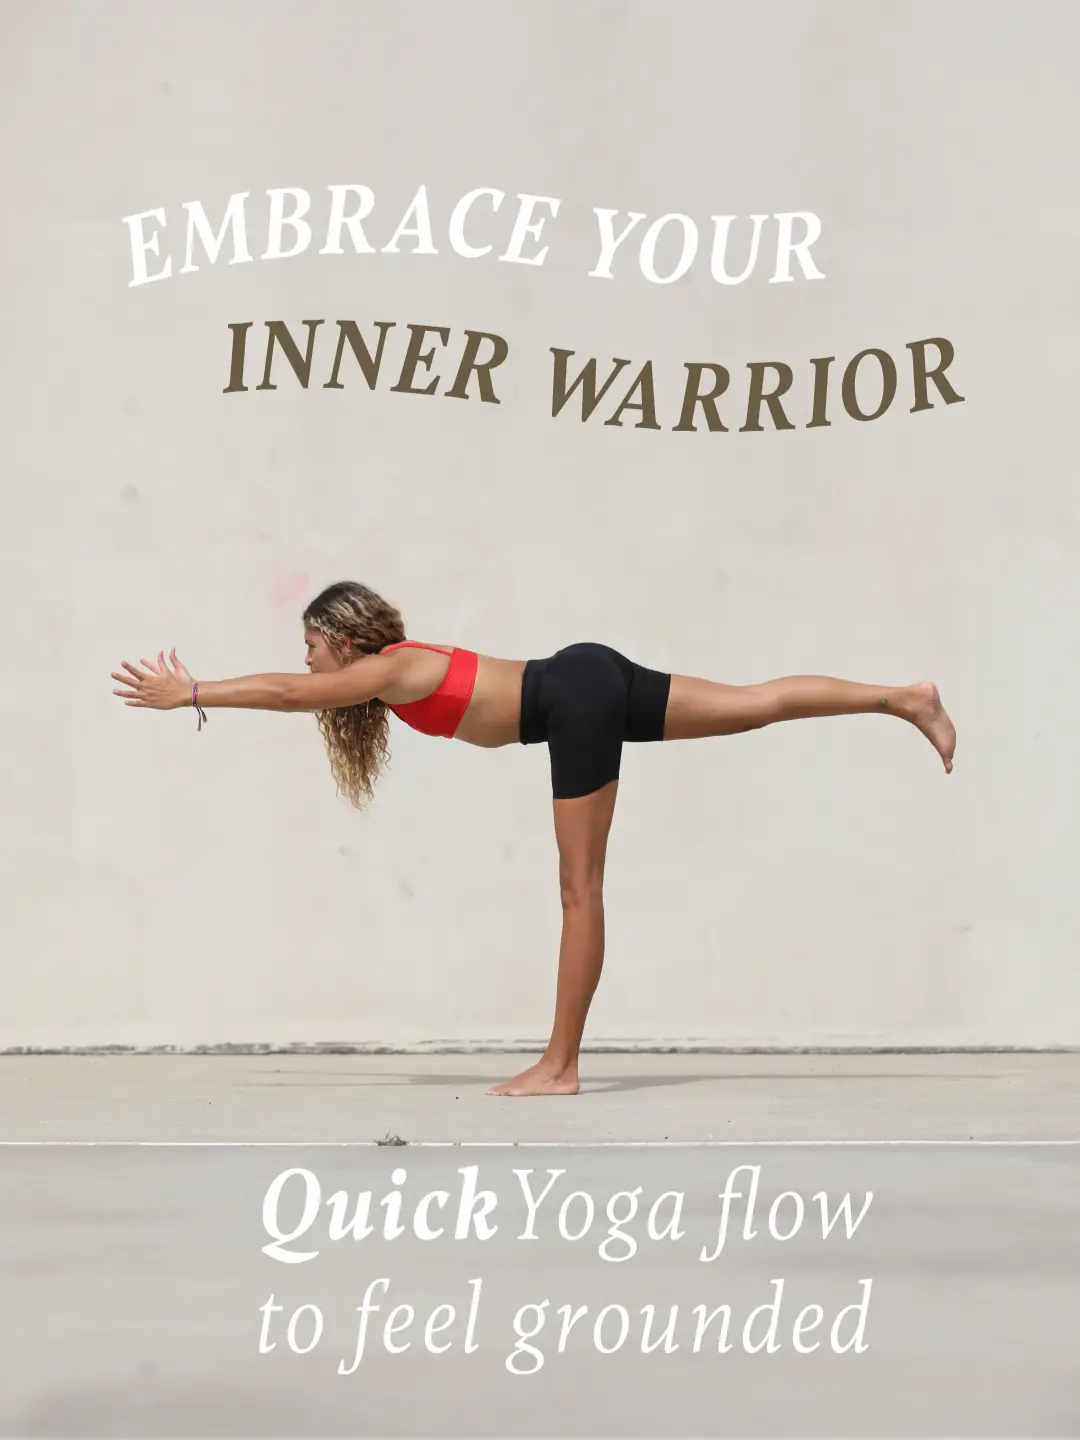 Yoga for Beginners: The WARRIORS, Gallery posted by Imani Nicole